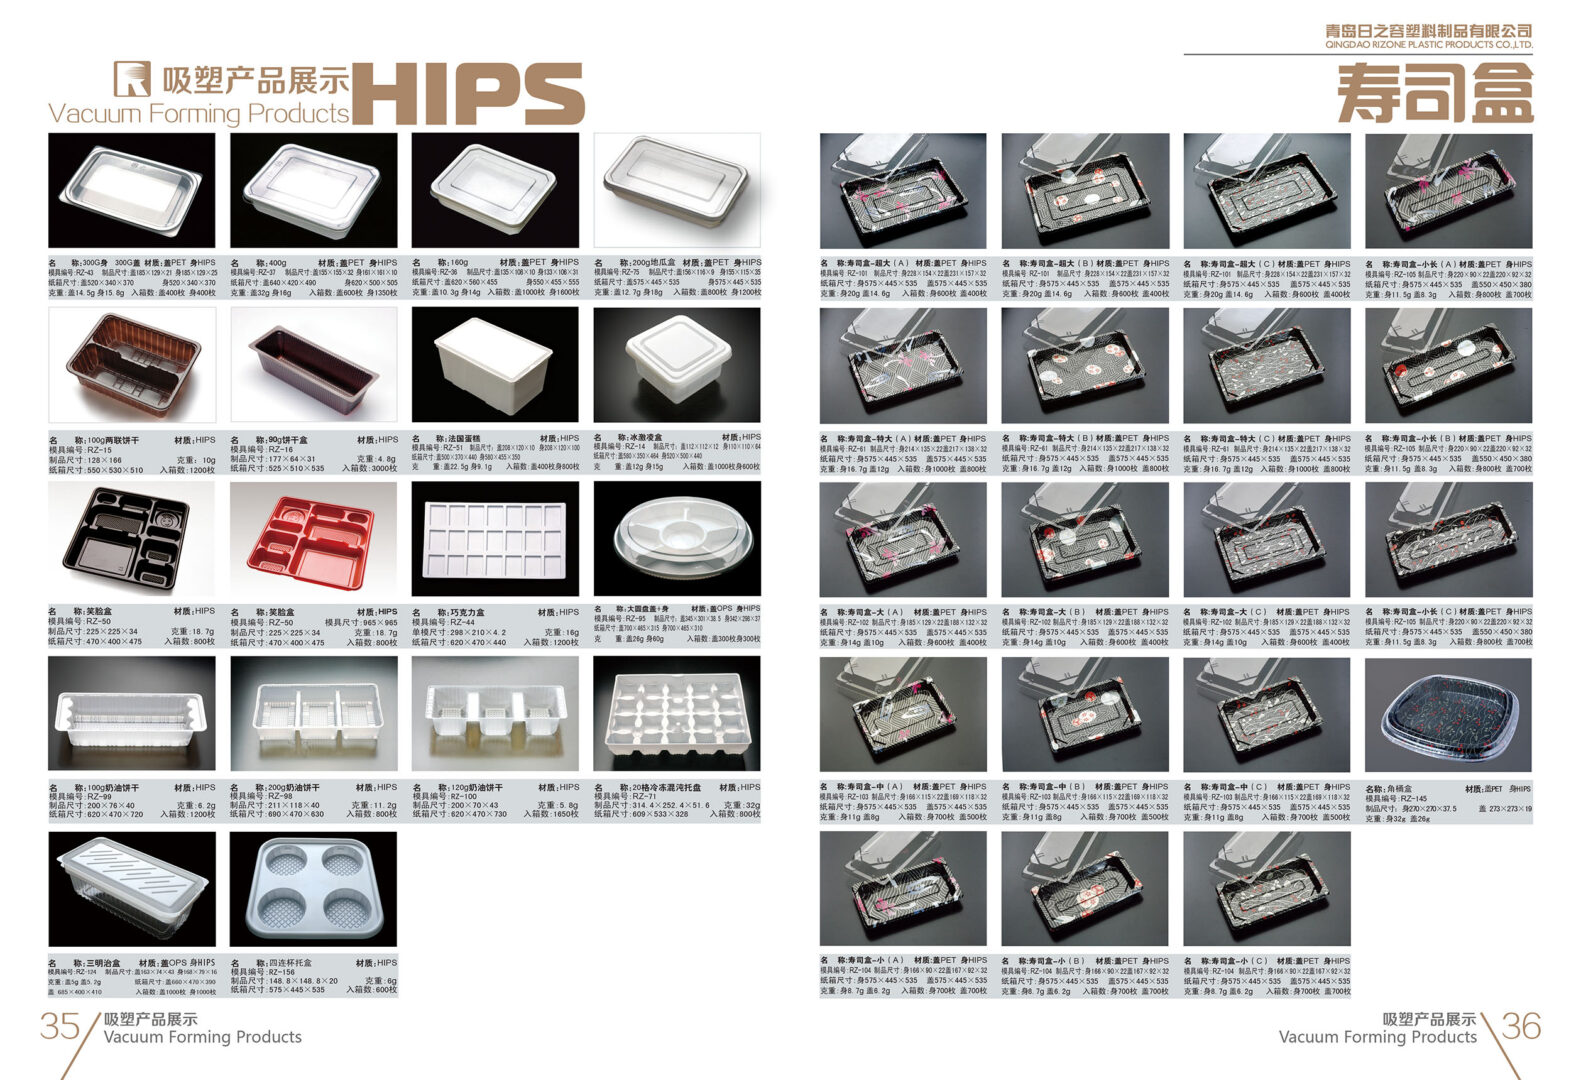 A catalog of plastic containers